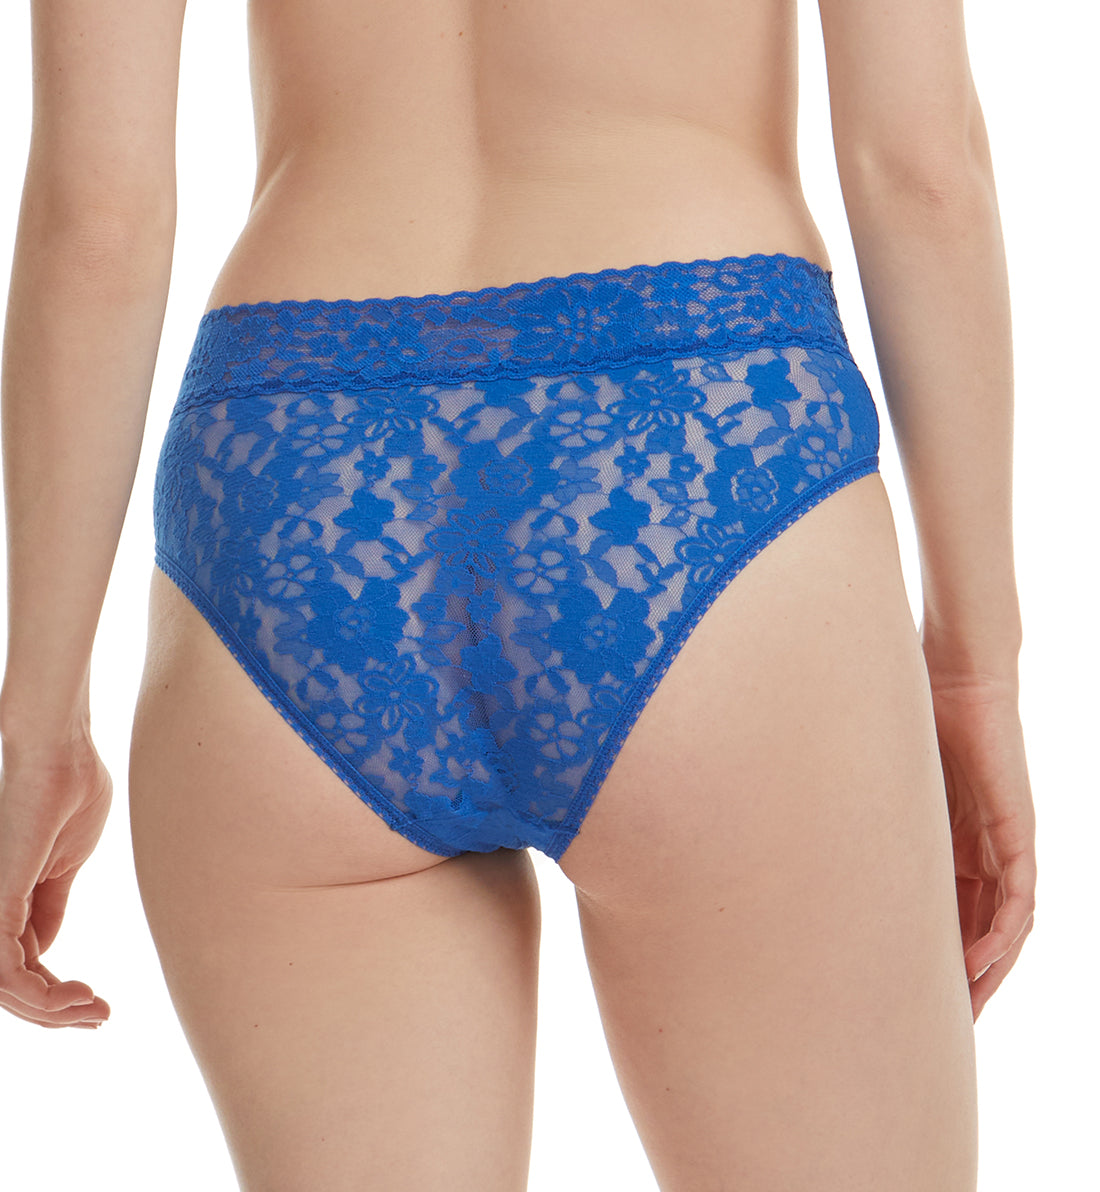 Hanky Panky Daily Lace Girl Brief (772441),XS,Bold Blue - Bold Blue,XS